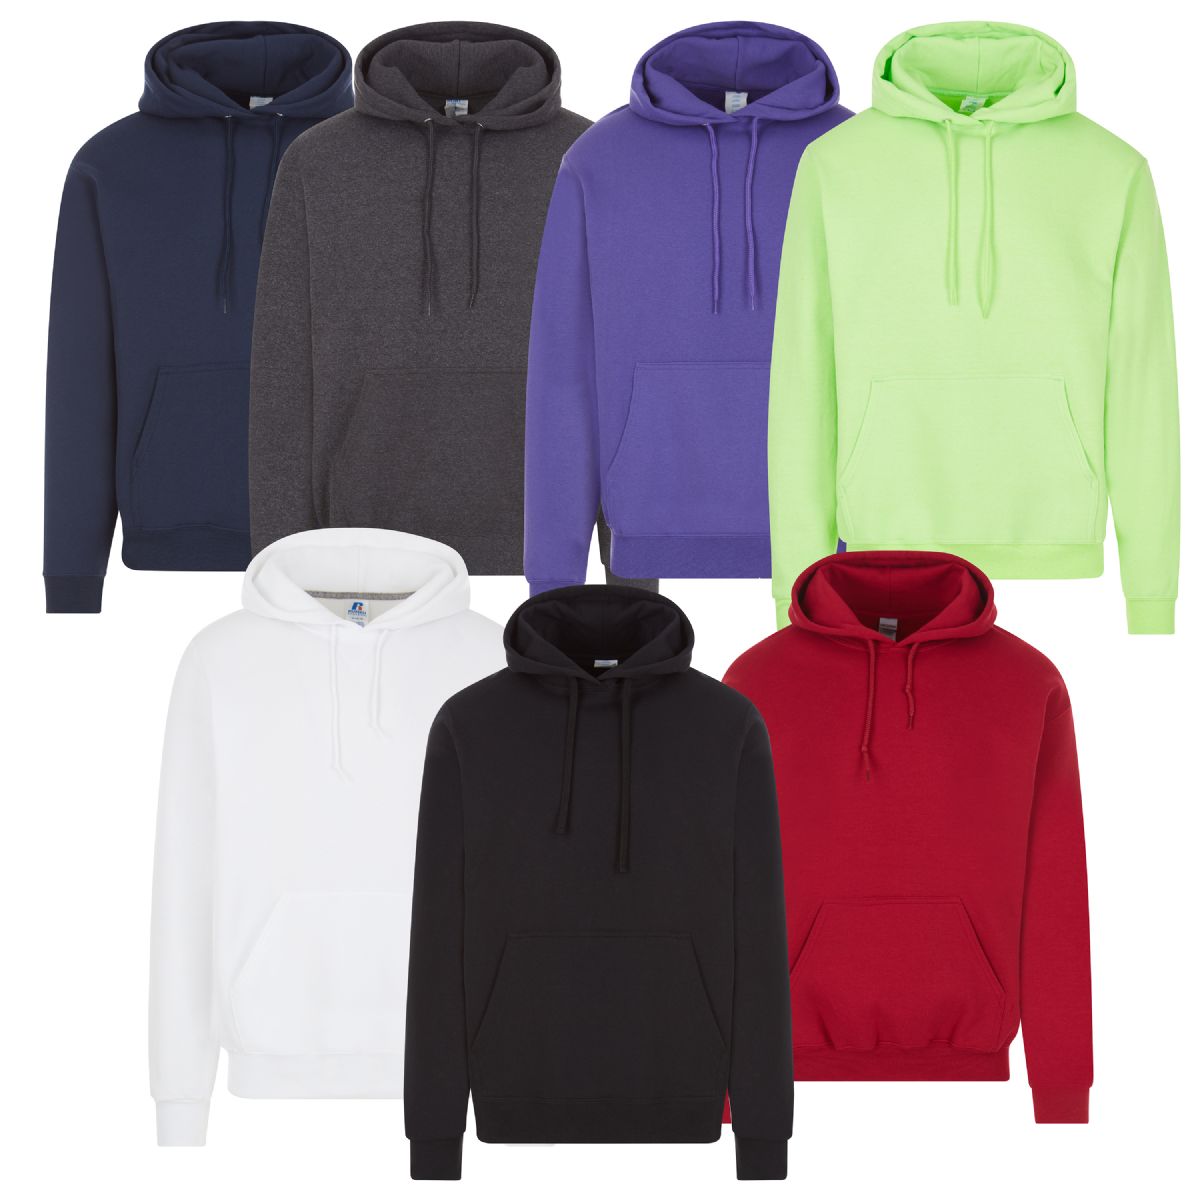 48 Pieces of Mens Cotton Irregular Hoodies With Front Pockets Asst Colors And Sizes M-2xl